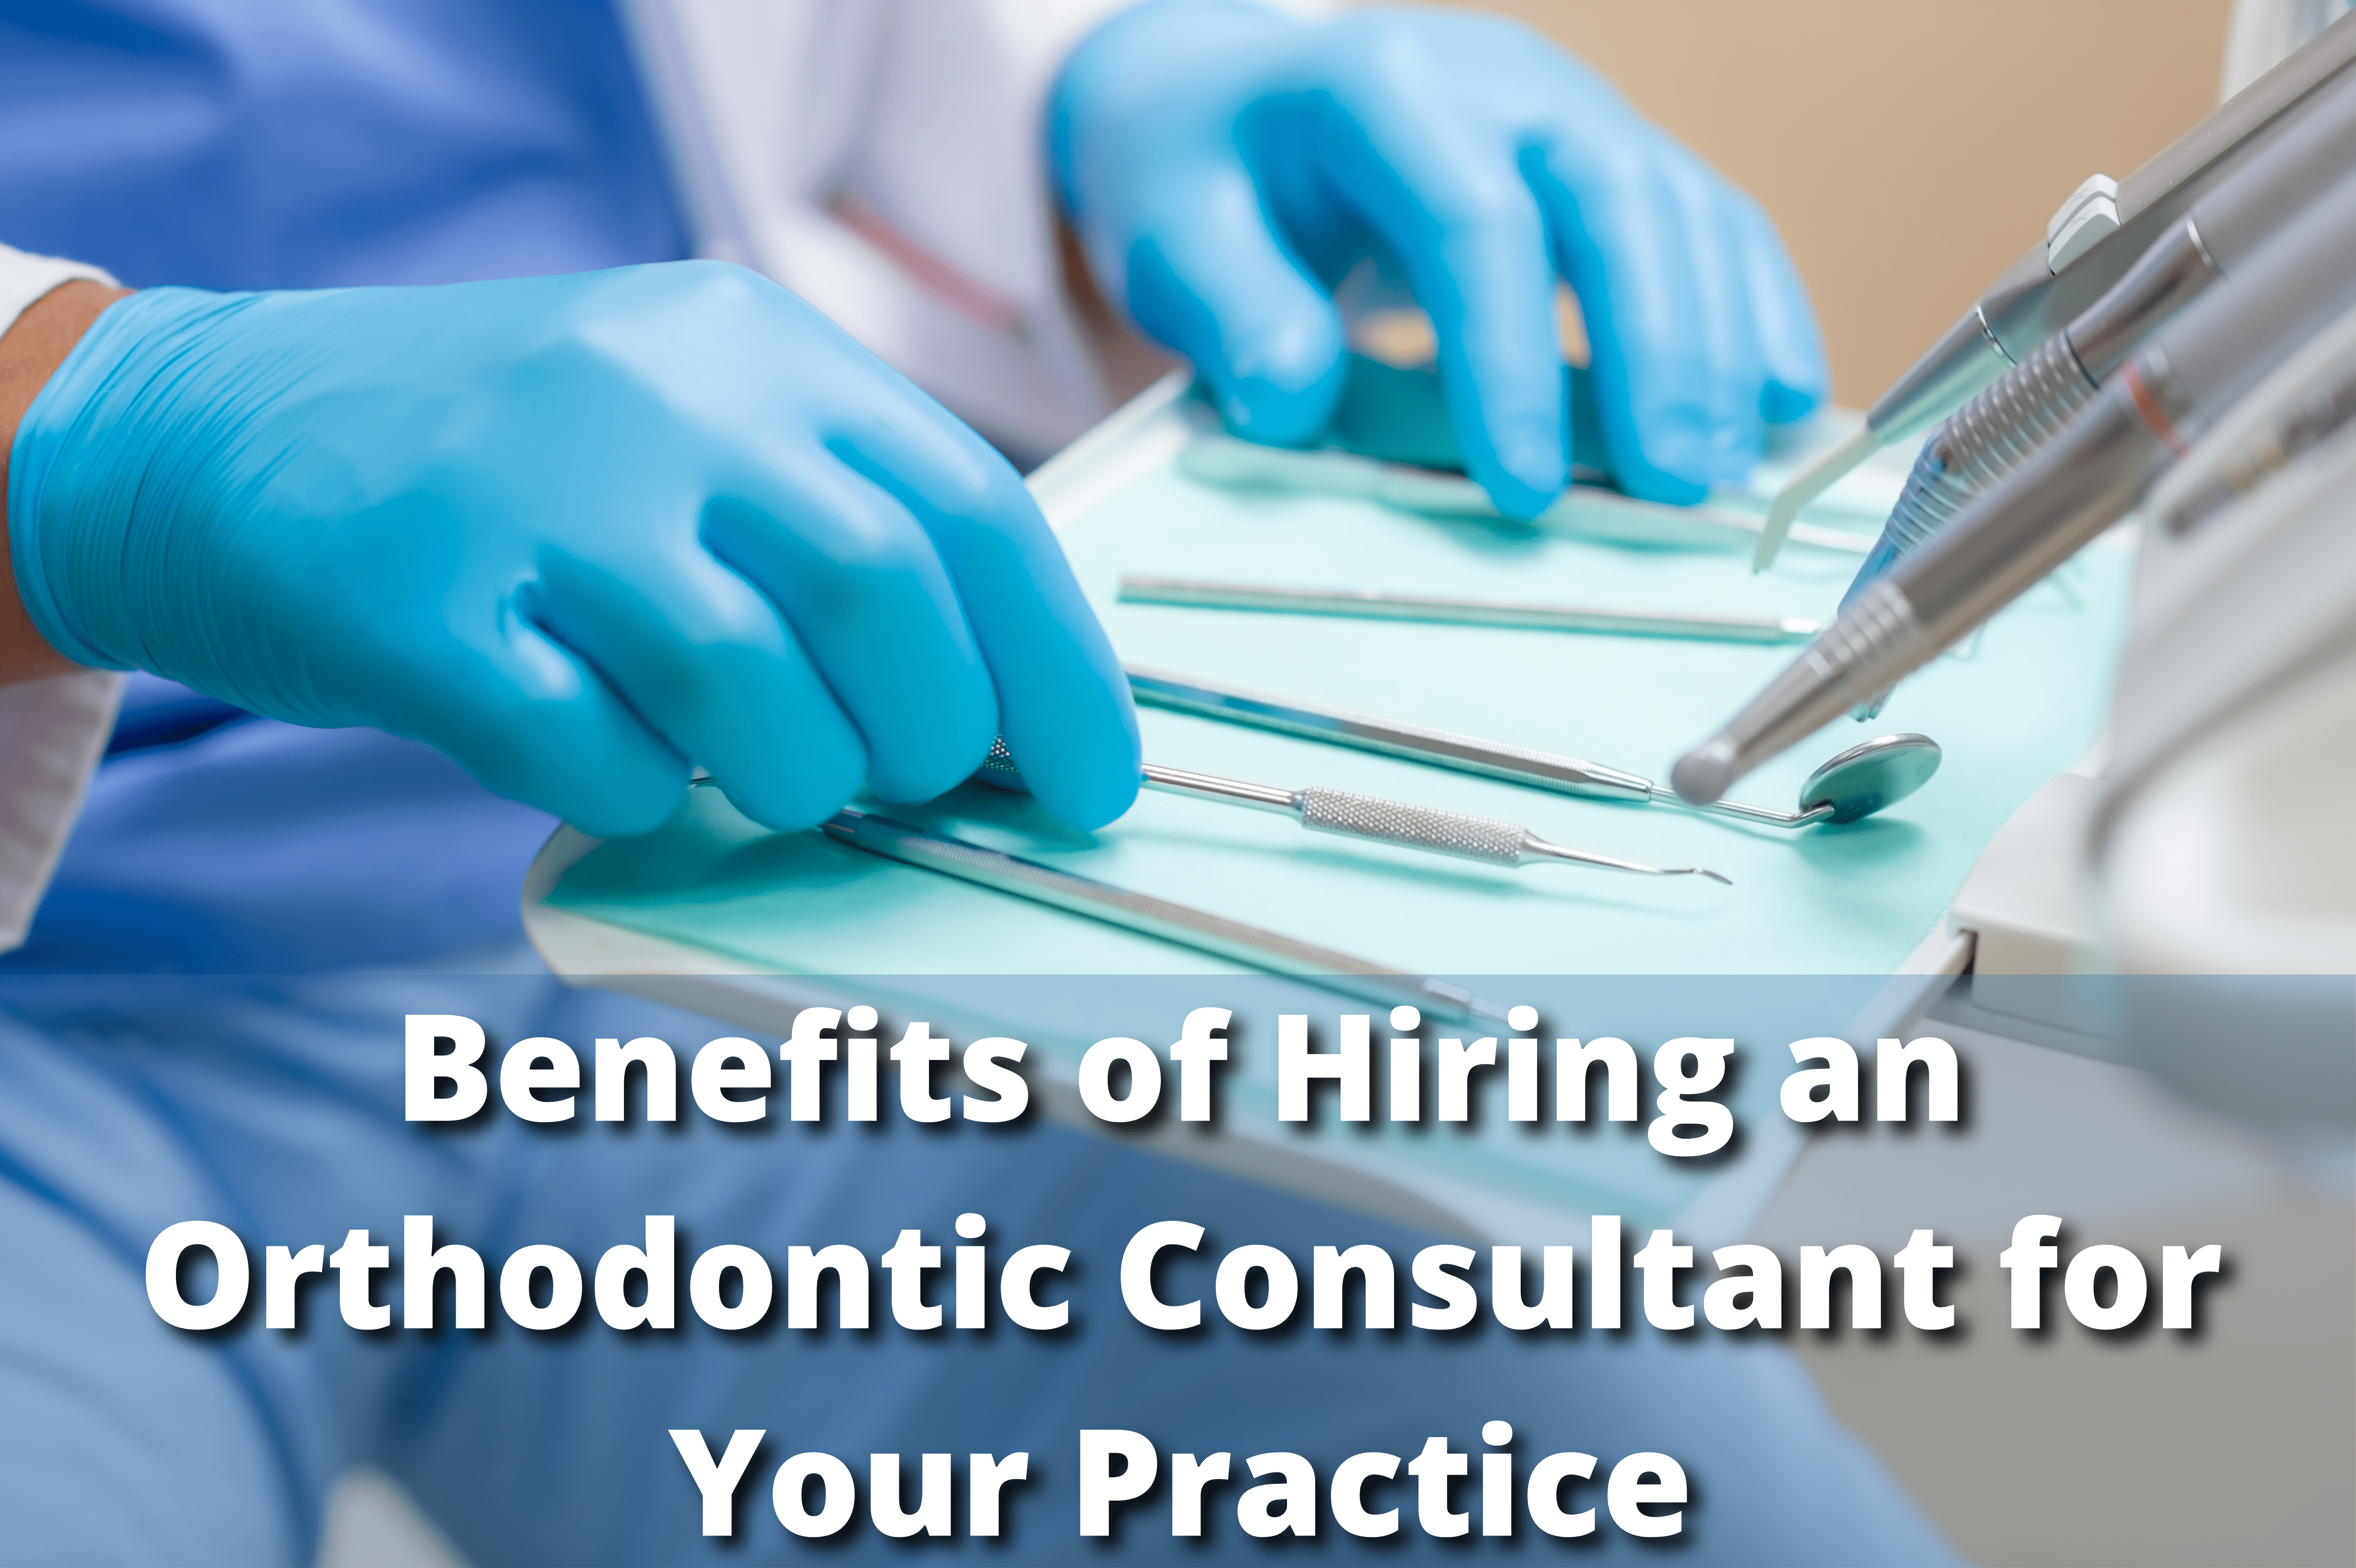 Benefits of Hiring an Orthodontic Consultant for Your Practice